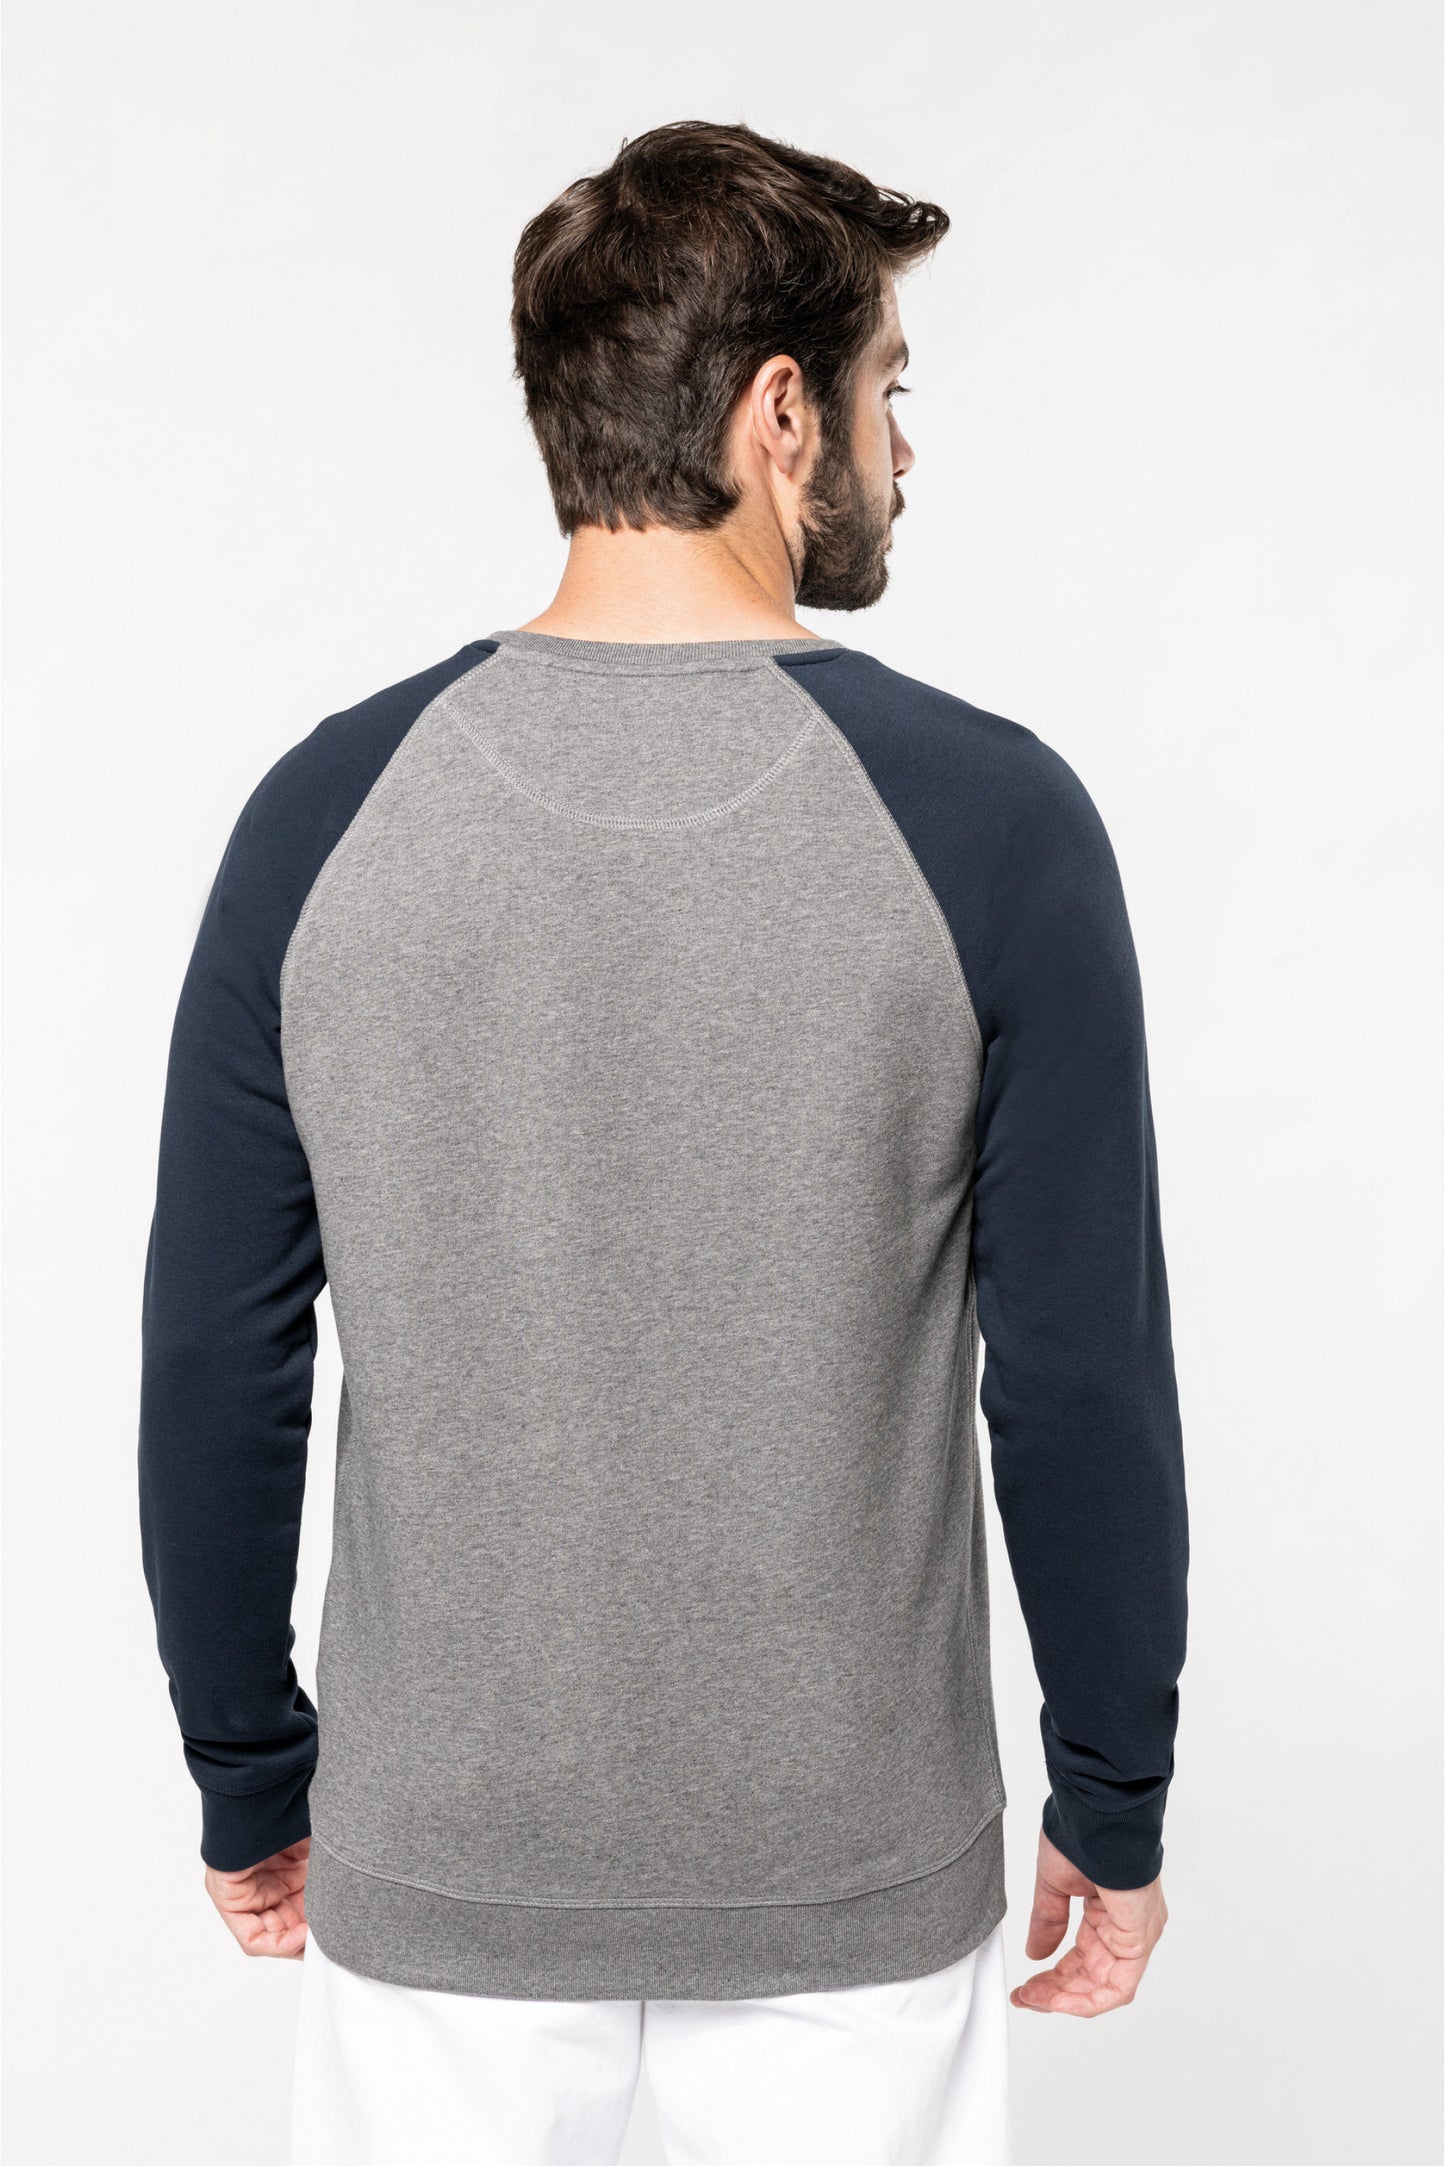 SN491 SWEAT COL ROND BICOLORE.HOMME 